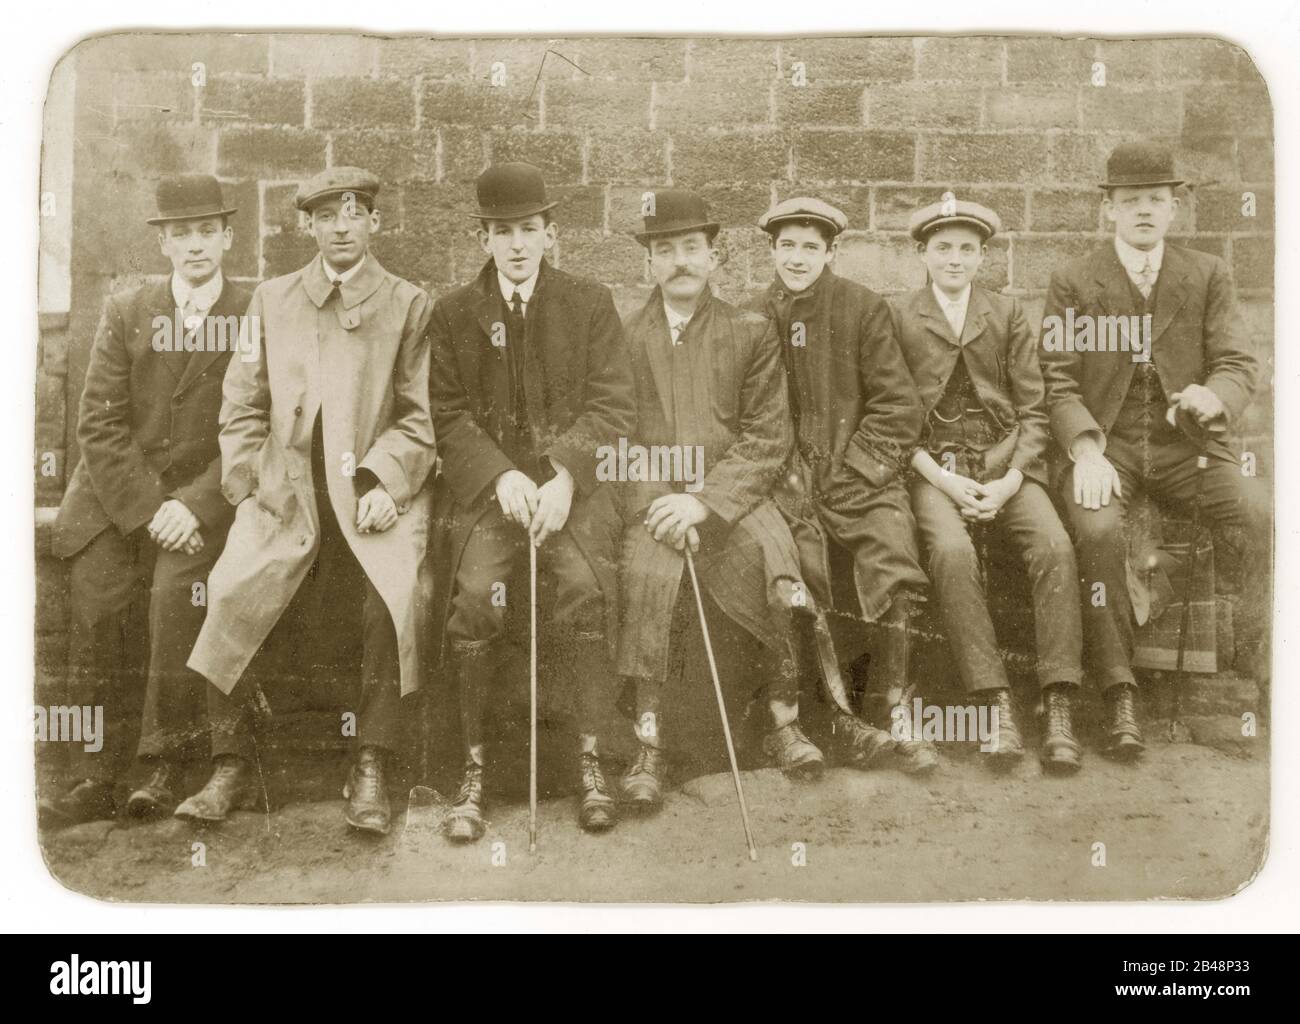 Early 1900's Edwardian cabinet card of group of seven young men and boys wearing flat caps and bowler hats, some holding walking sticks or canes, rounded collars, sitting together resting after a walk on a bench, U.K. Circa 1905 Stock Photo